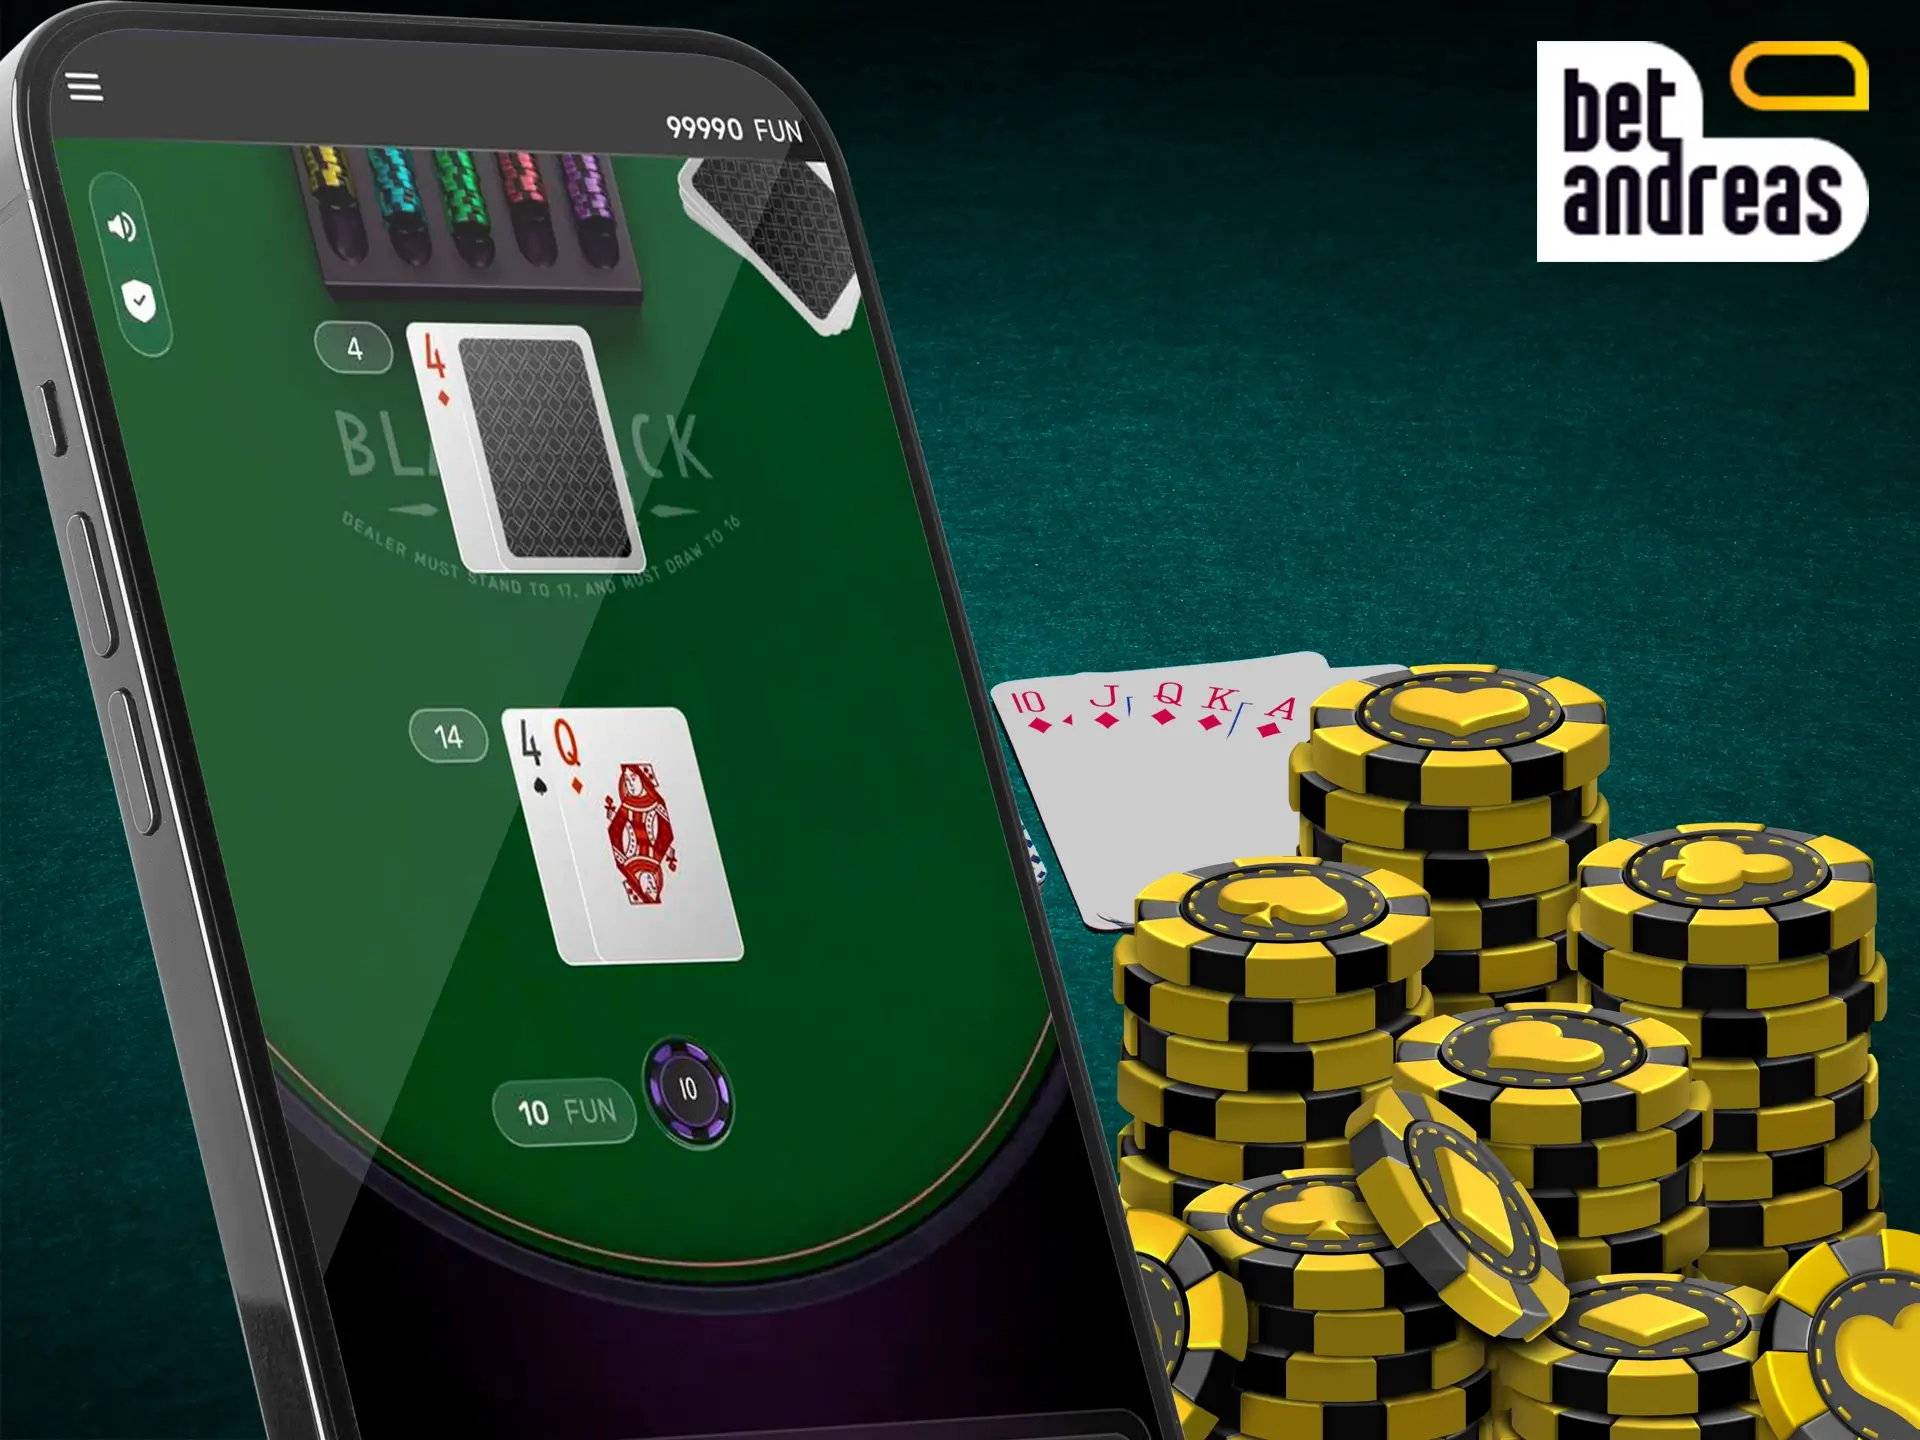 Blackjack is an interesting and easy to understand game, but be careful with the addition of cards.